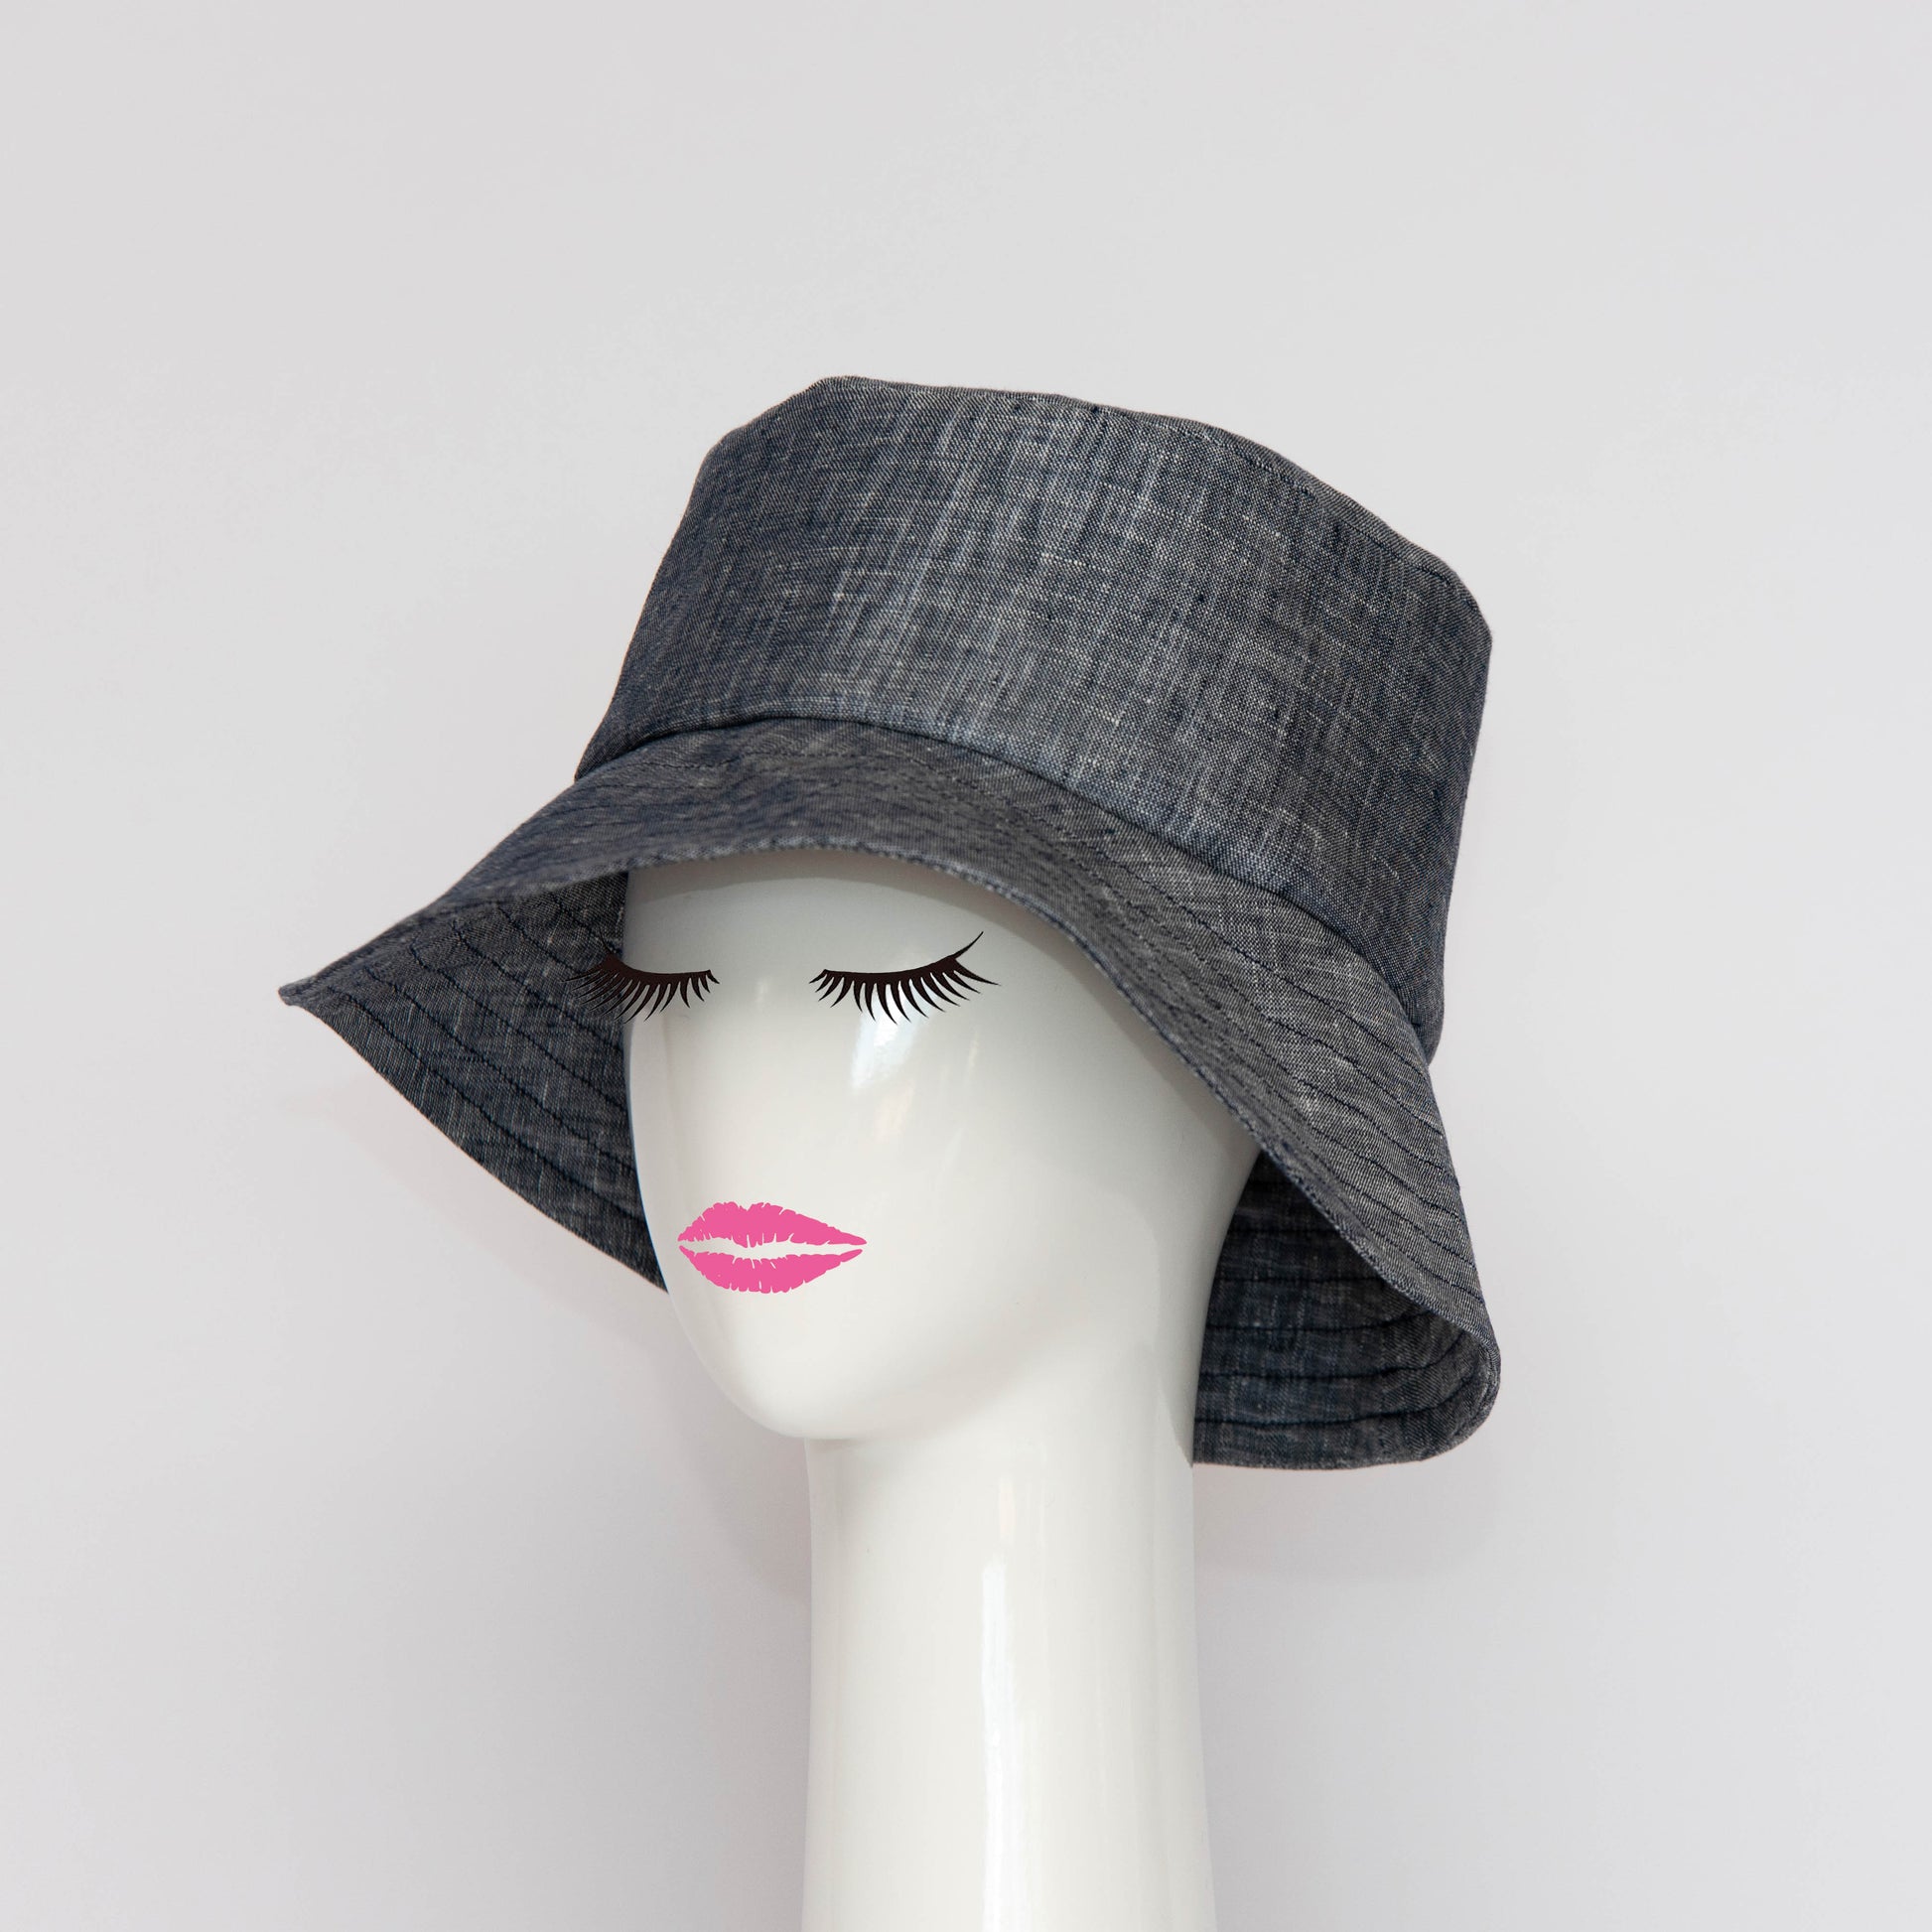 The Appin Bucket Hat in denim has a square shape crown with tip and side band.  The picture shows the hat on an angle, showcasing the flared brim which protects you from the sun.  Created by Melbourne based Lauren J Ritchie Millinery.